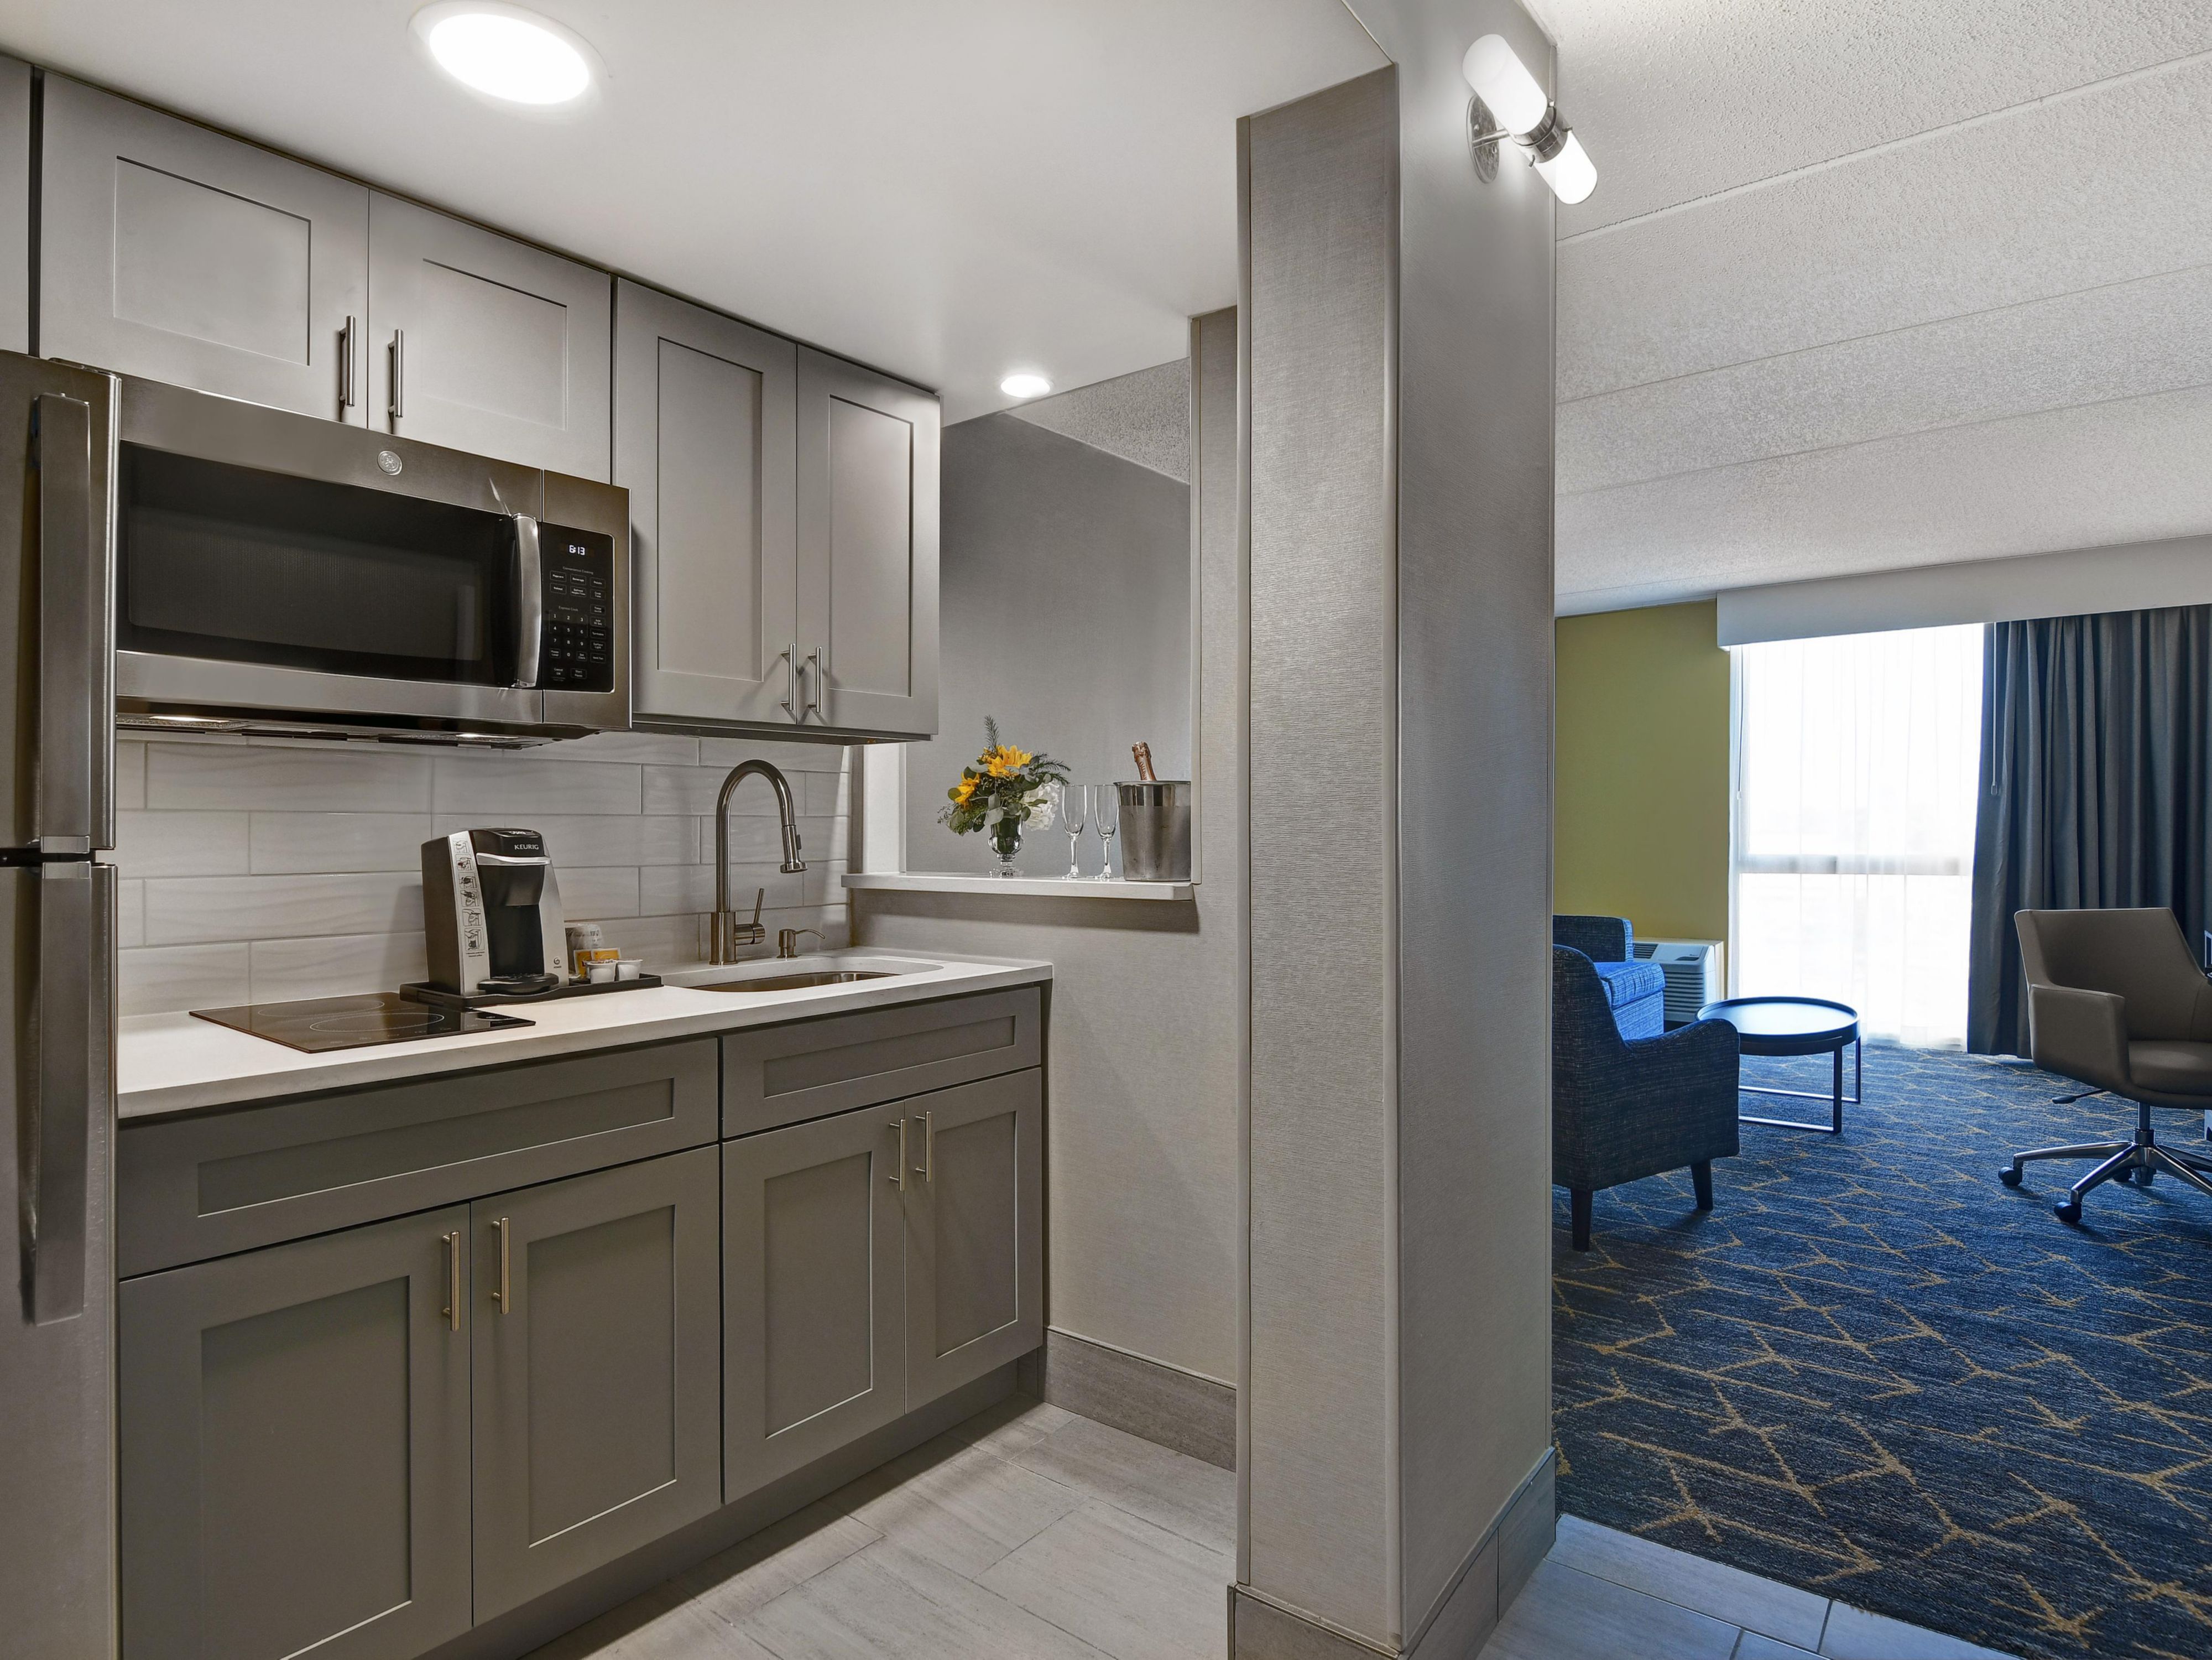 Our brand new King with Kitchen Suites are available to book. Each suite includes a full size refrigerator, stove top, and microwave. Contact the hotel directly for our extended stay rates.